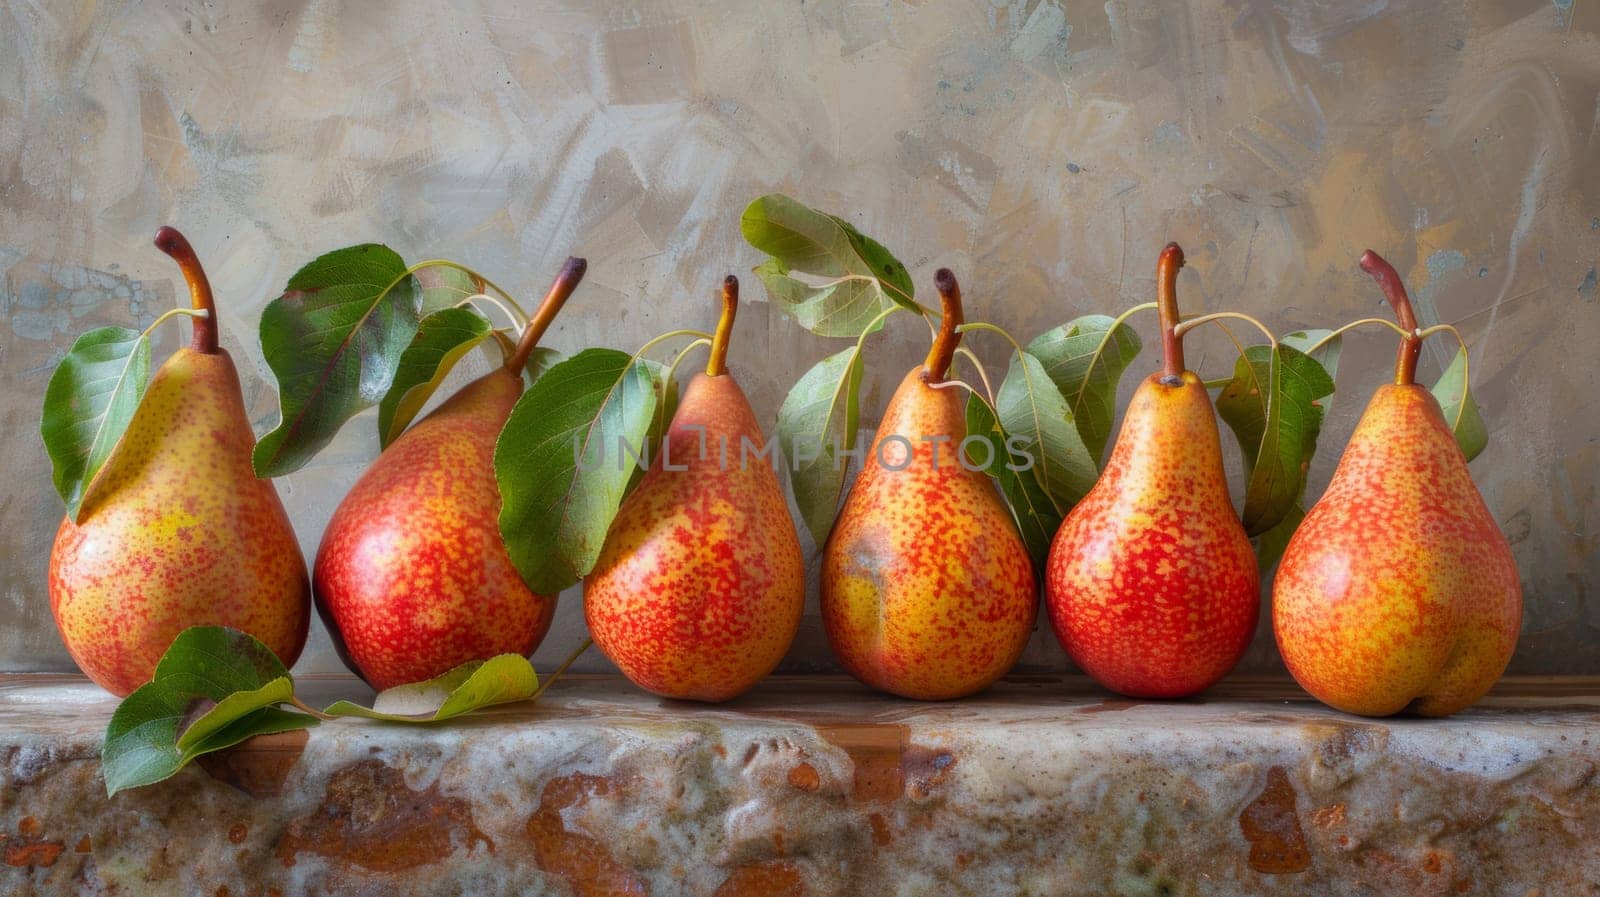 A row of pears with leaves on them are lined up